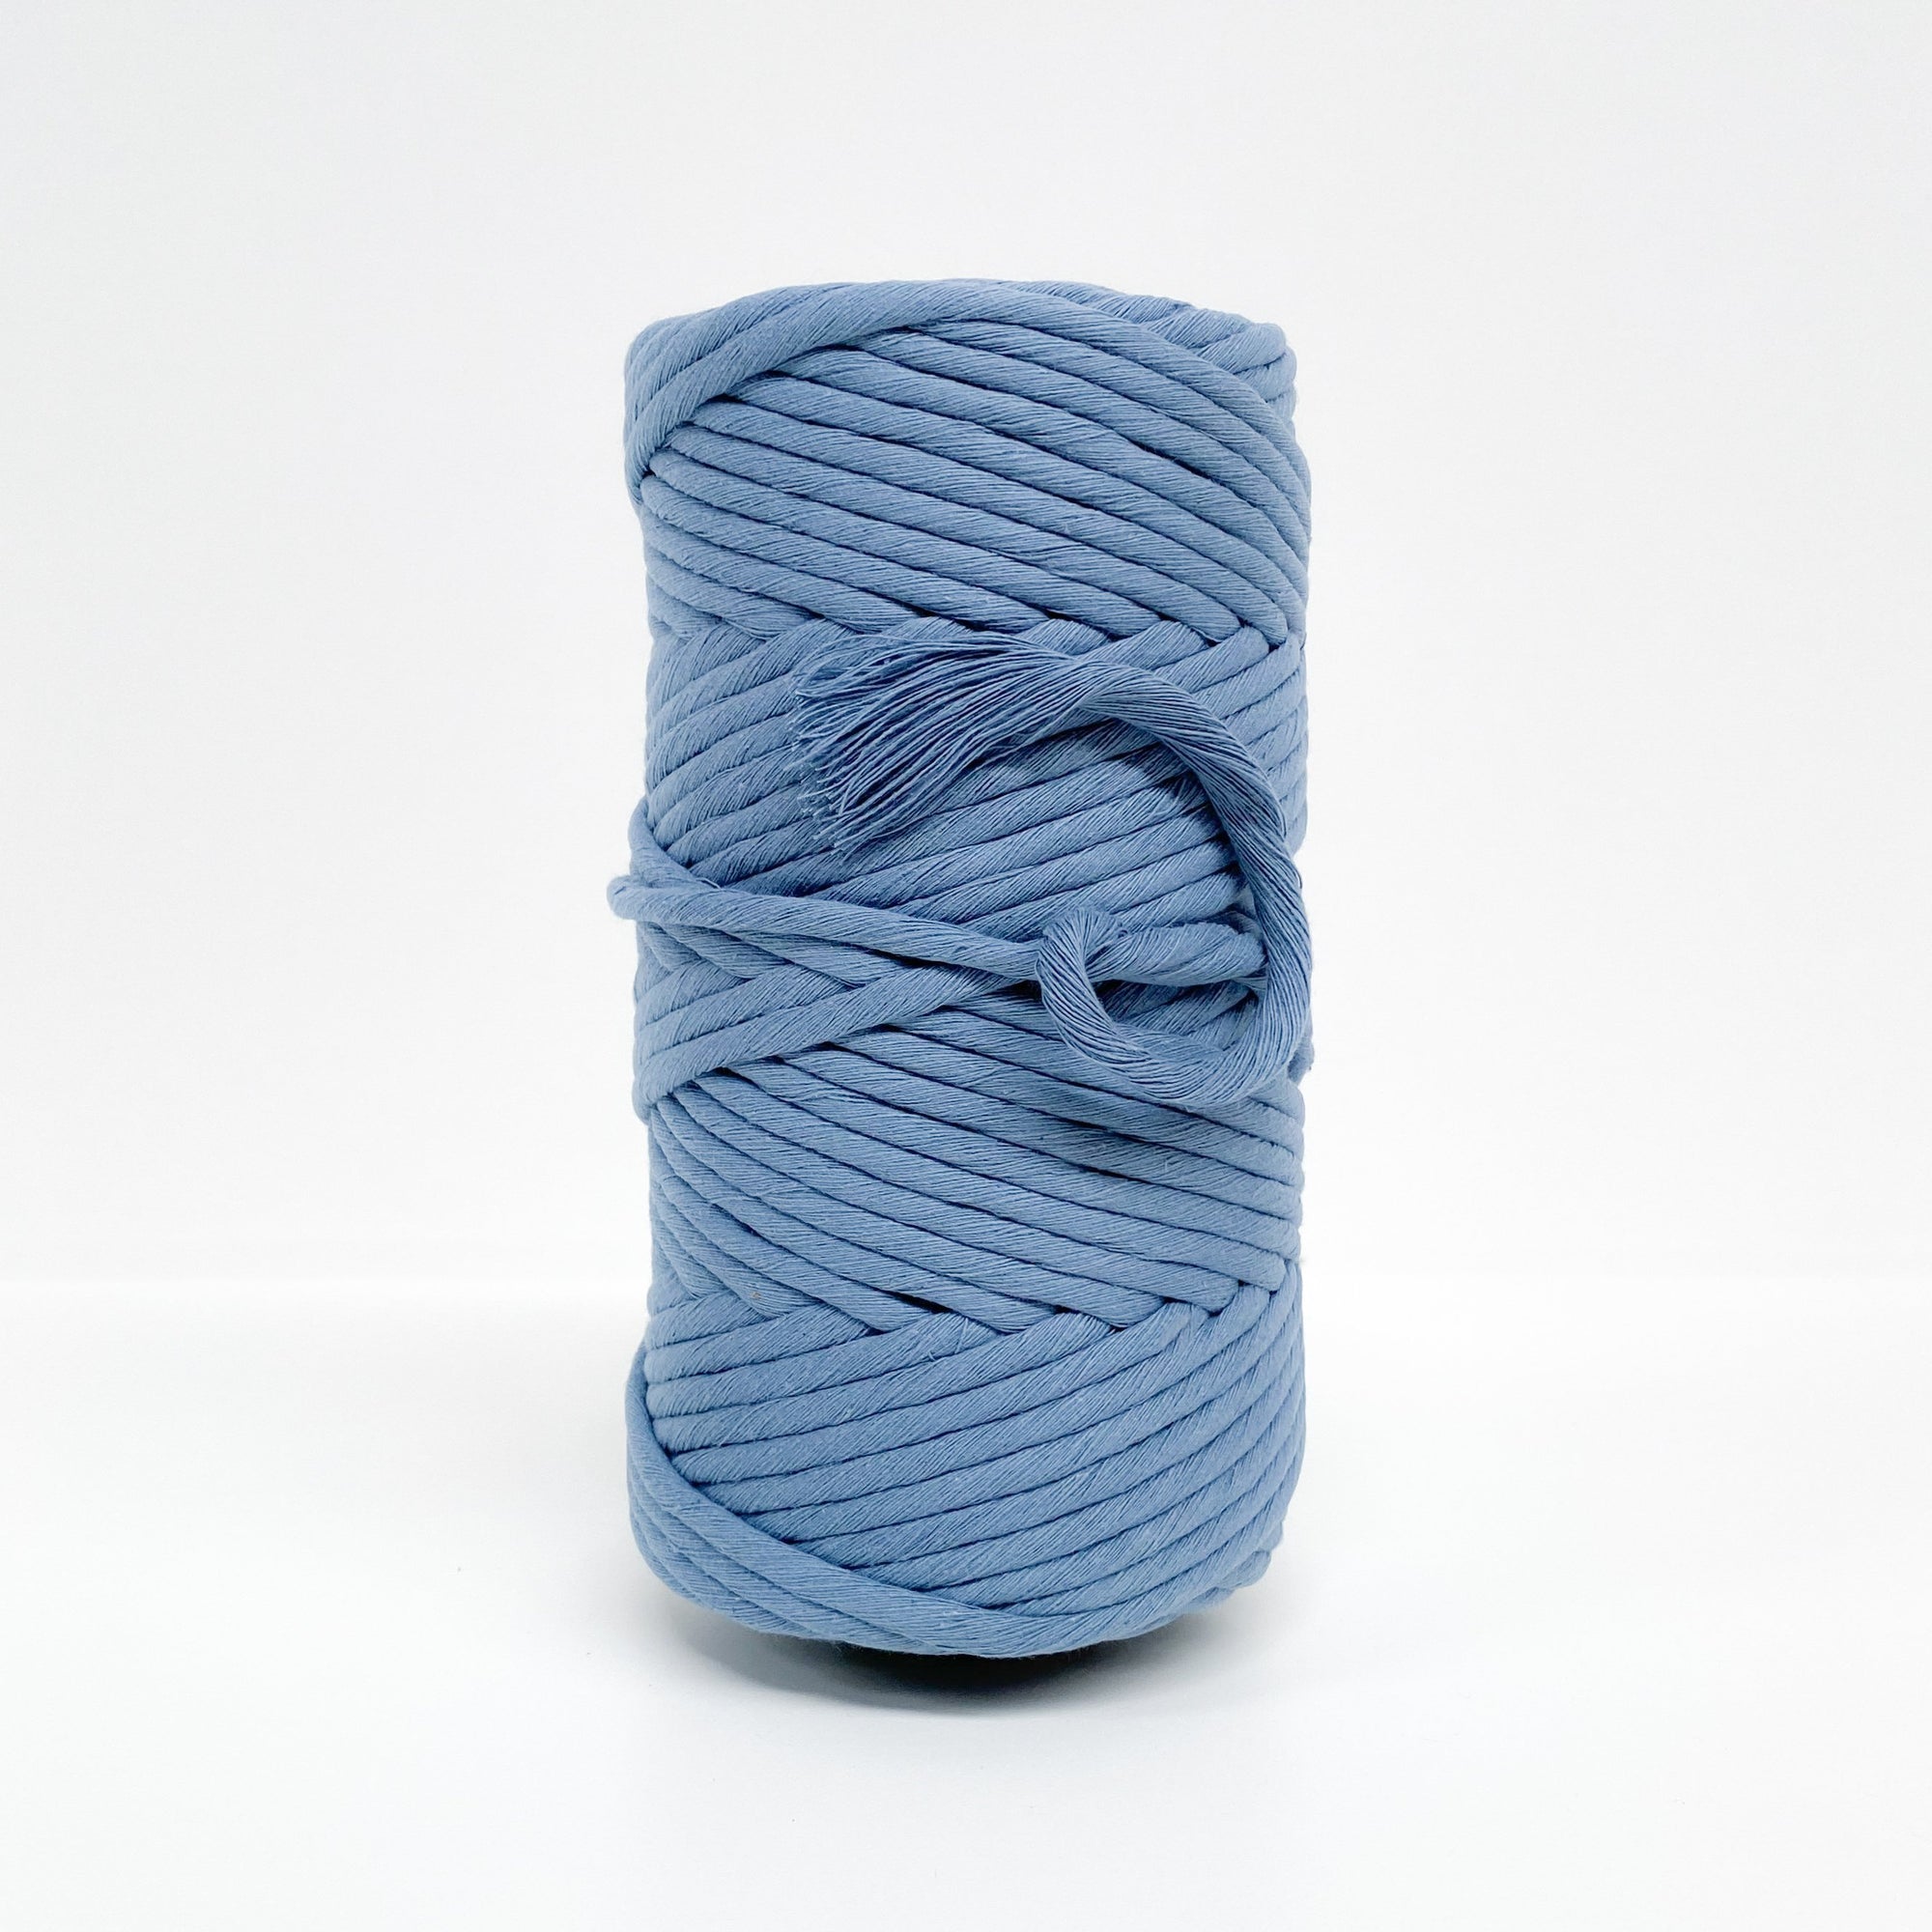 Mary Maker Studio Luxe Colour Cotton 8mm 1KG 8mm Recycled Luxe Macrame String // Vintage Blue macrame cotton macrame rope macrame workshop macrame patterns macrame